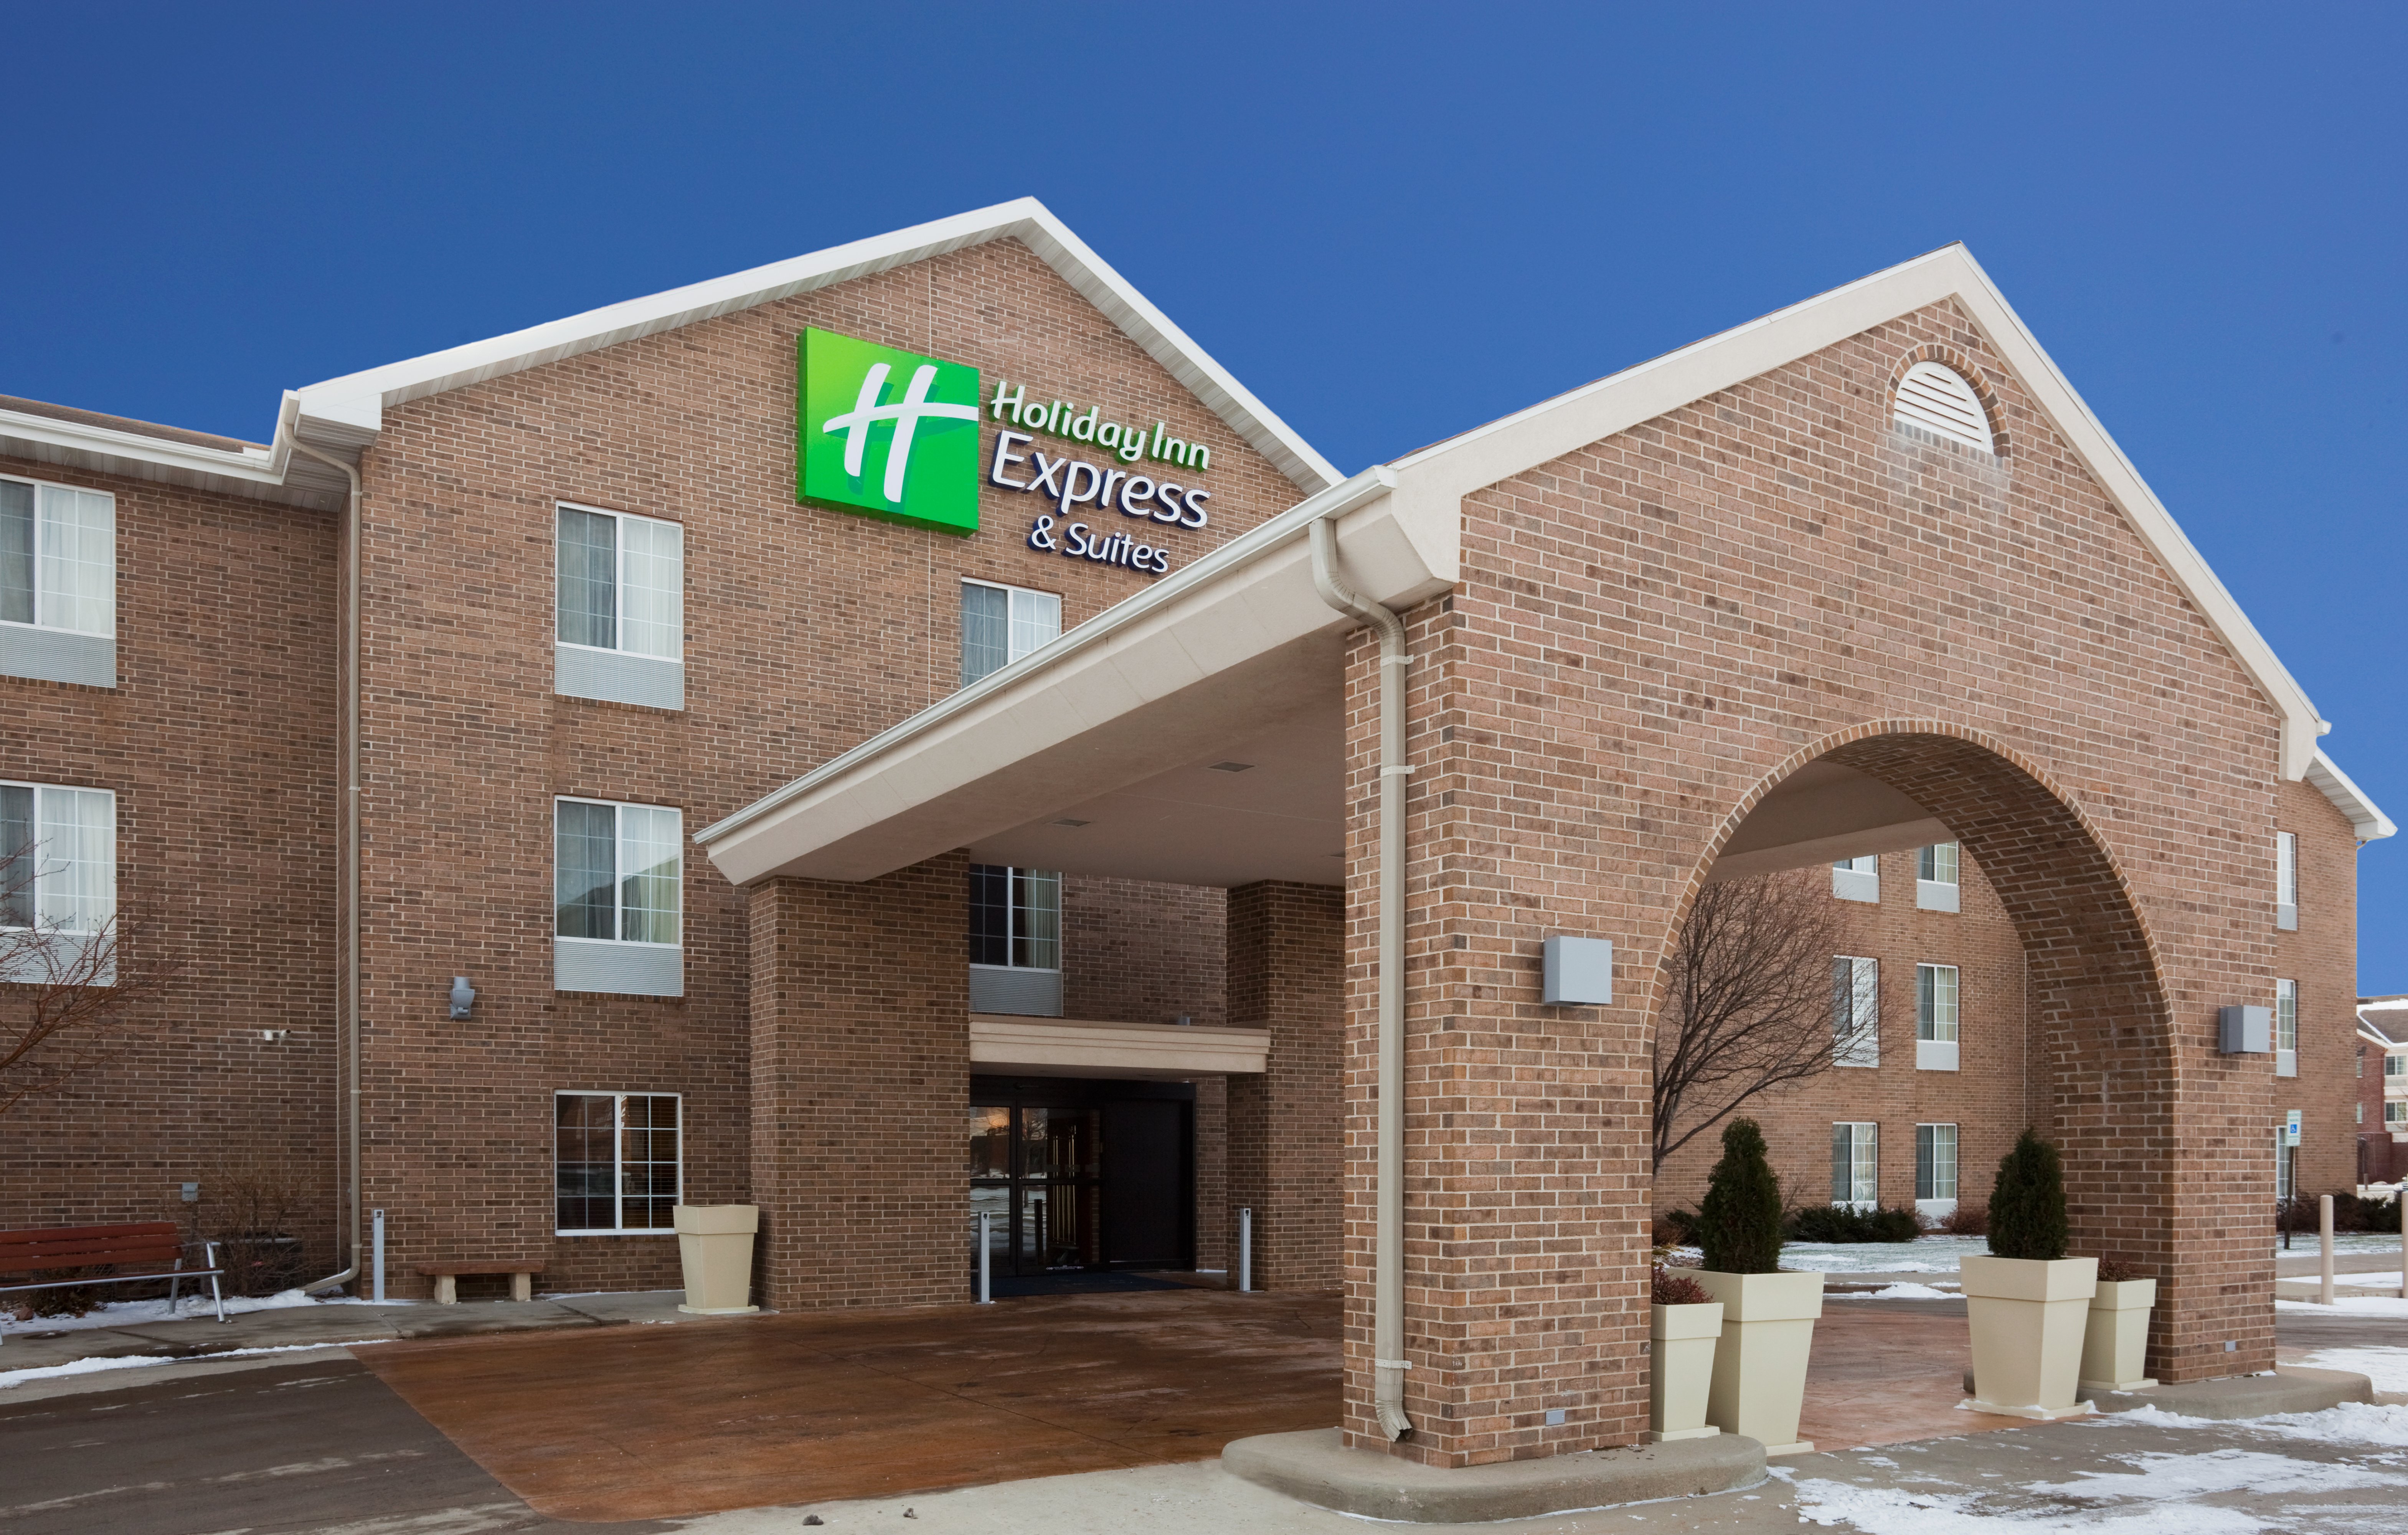 Welcome to Holiday Inn Express Hotel & Suites Sioux Falls!